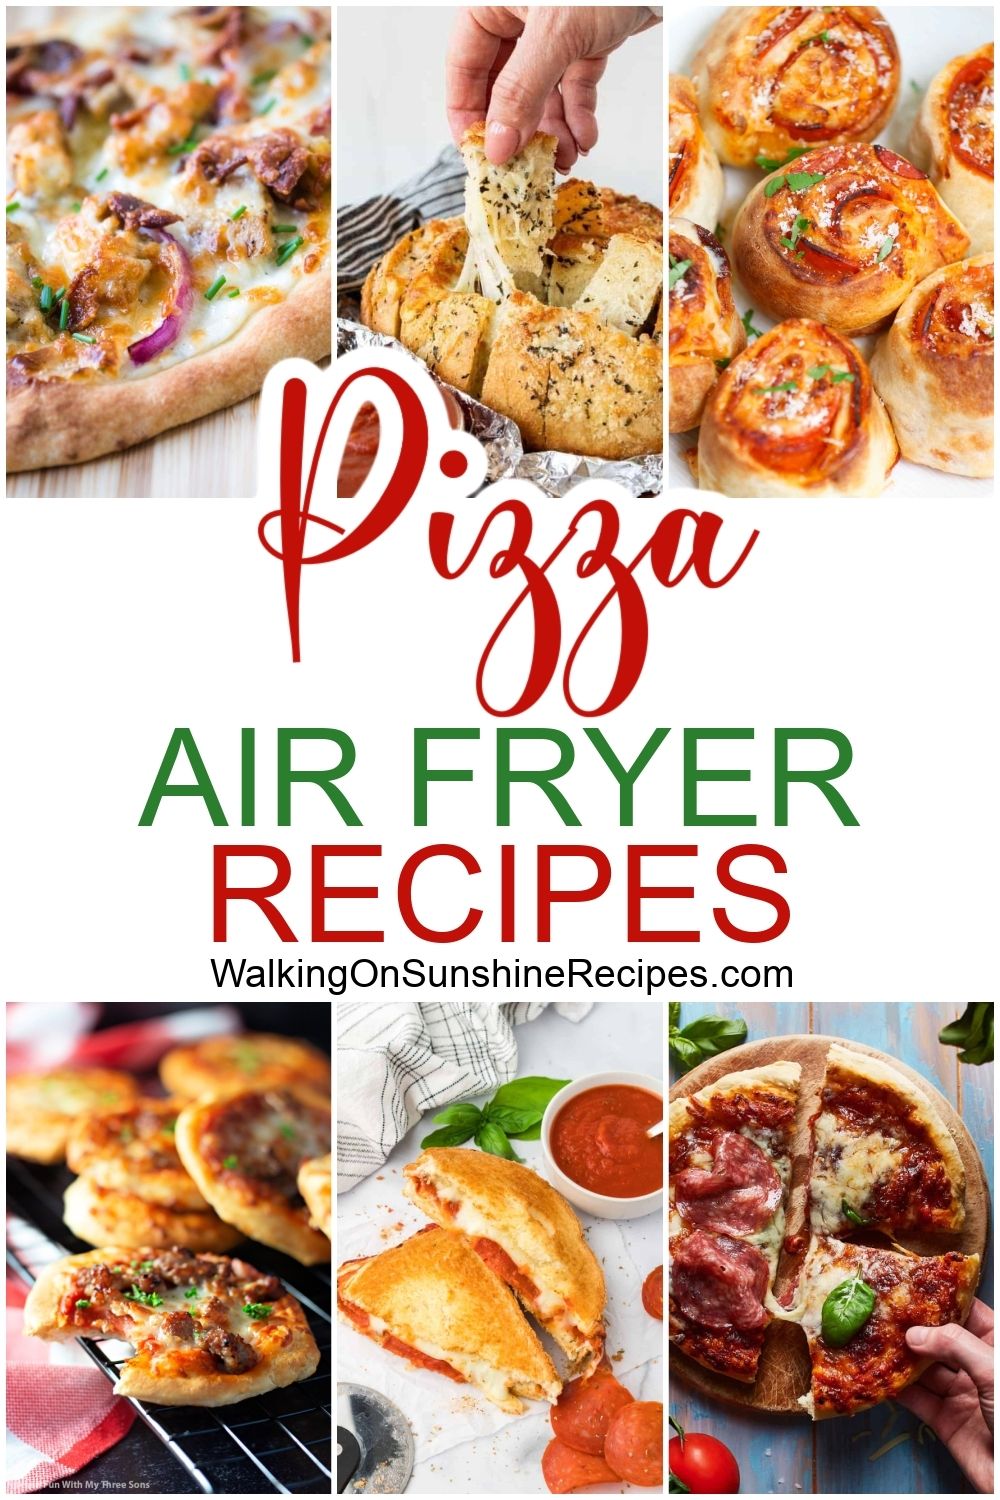 Pizza Air Fryer Recipes ready fast. 